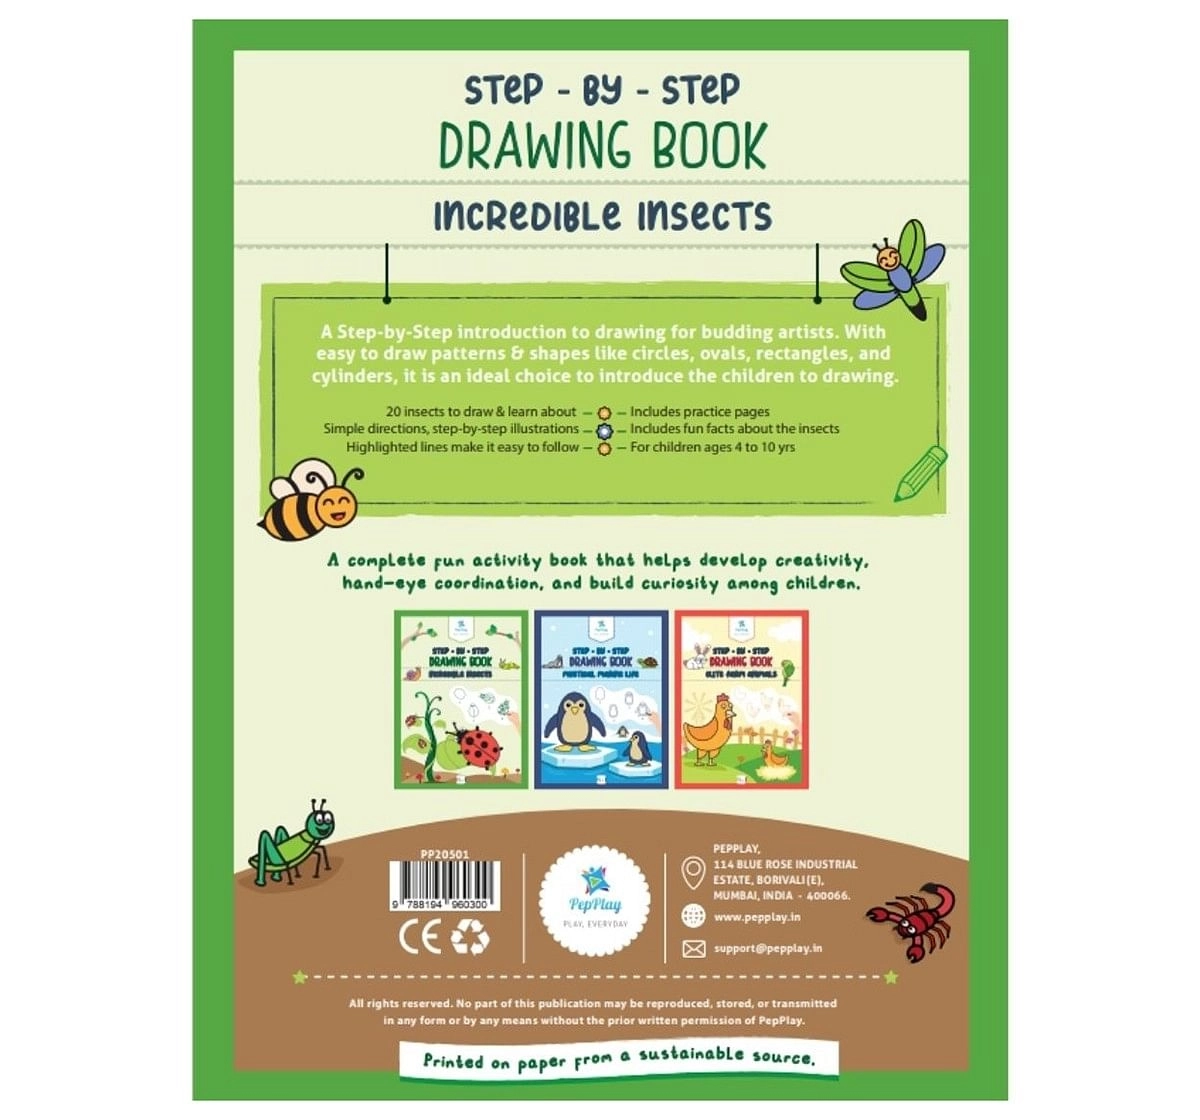 PepPlay Step by Step Drawing Book Incredible Insects 4Y+